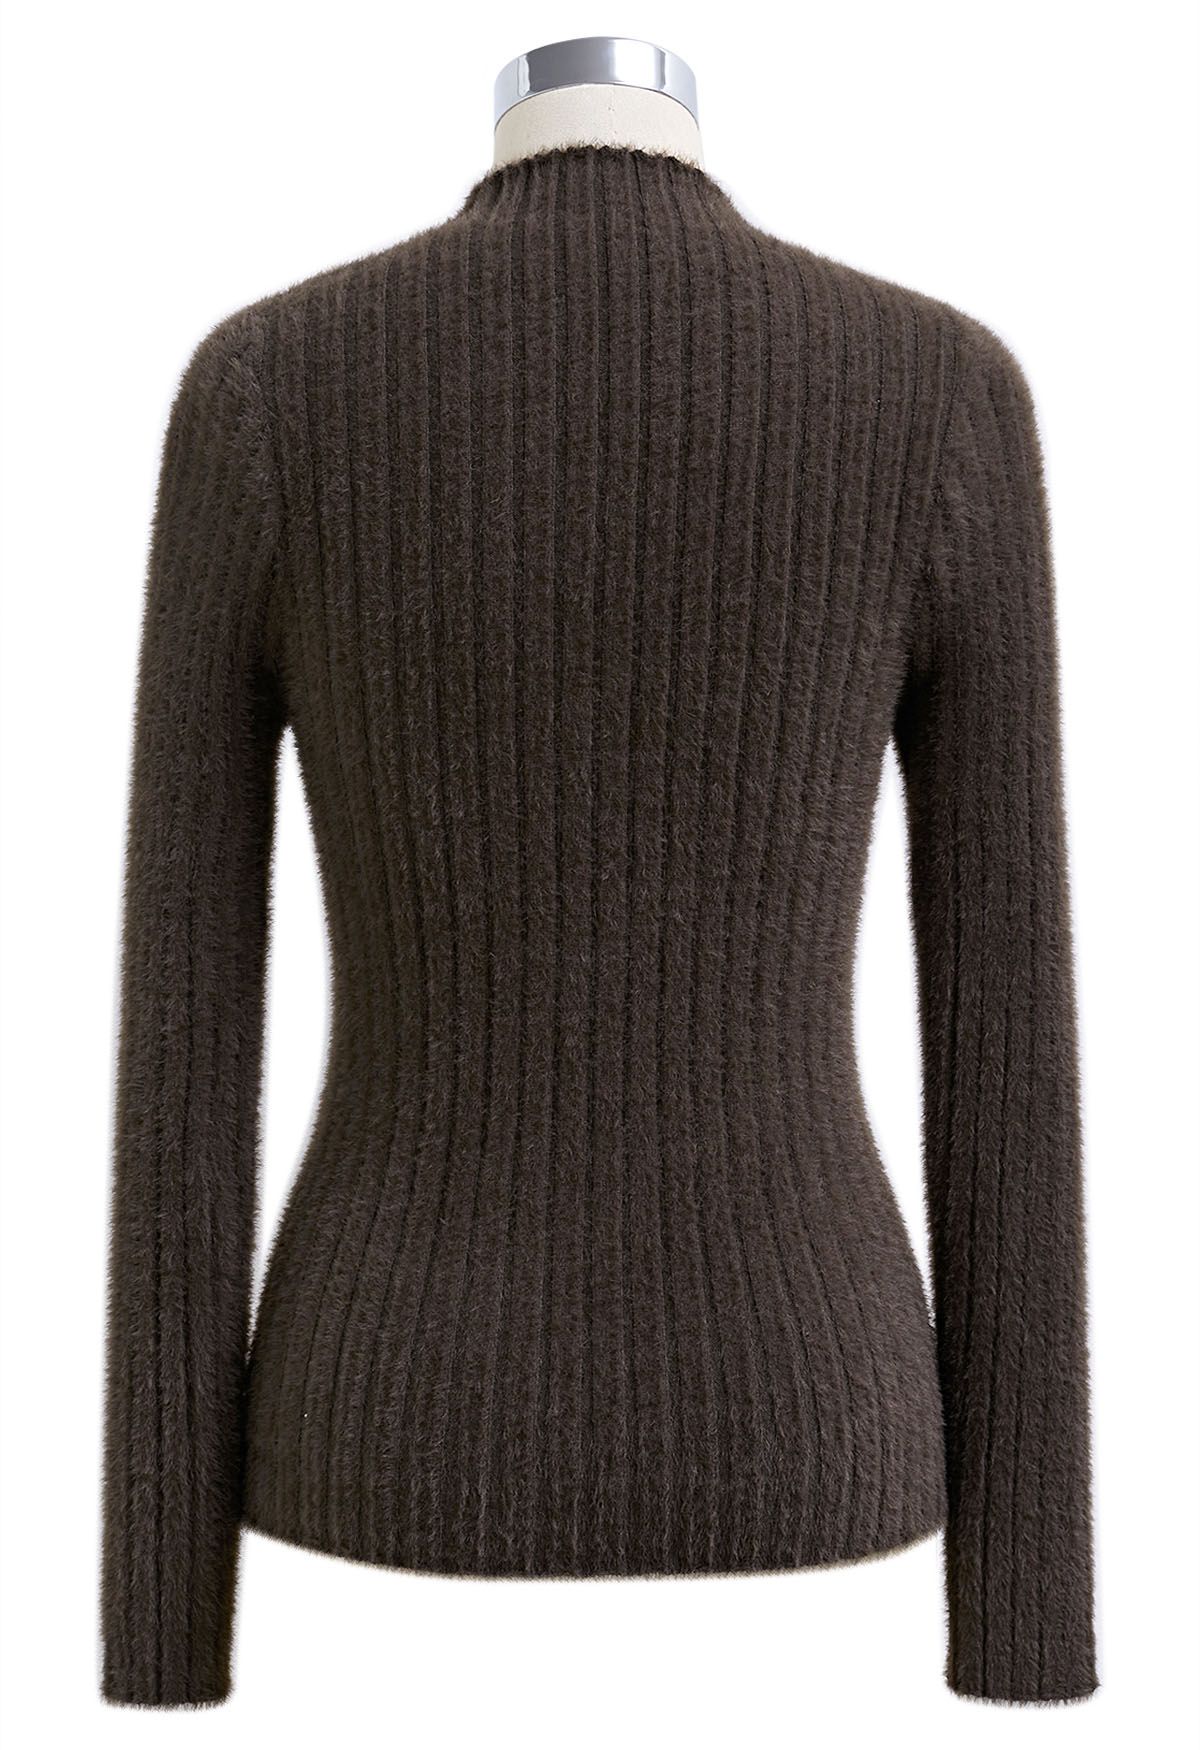 Mock Neck Fuzzy Rib Knit Top in Brown - Retro, Indie and Unique Fashion